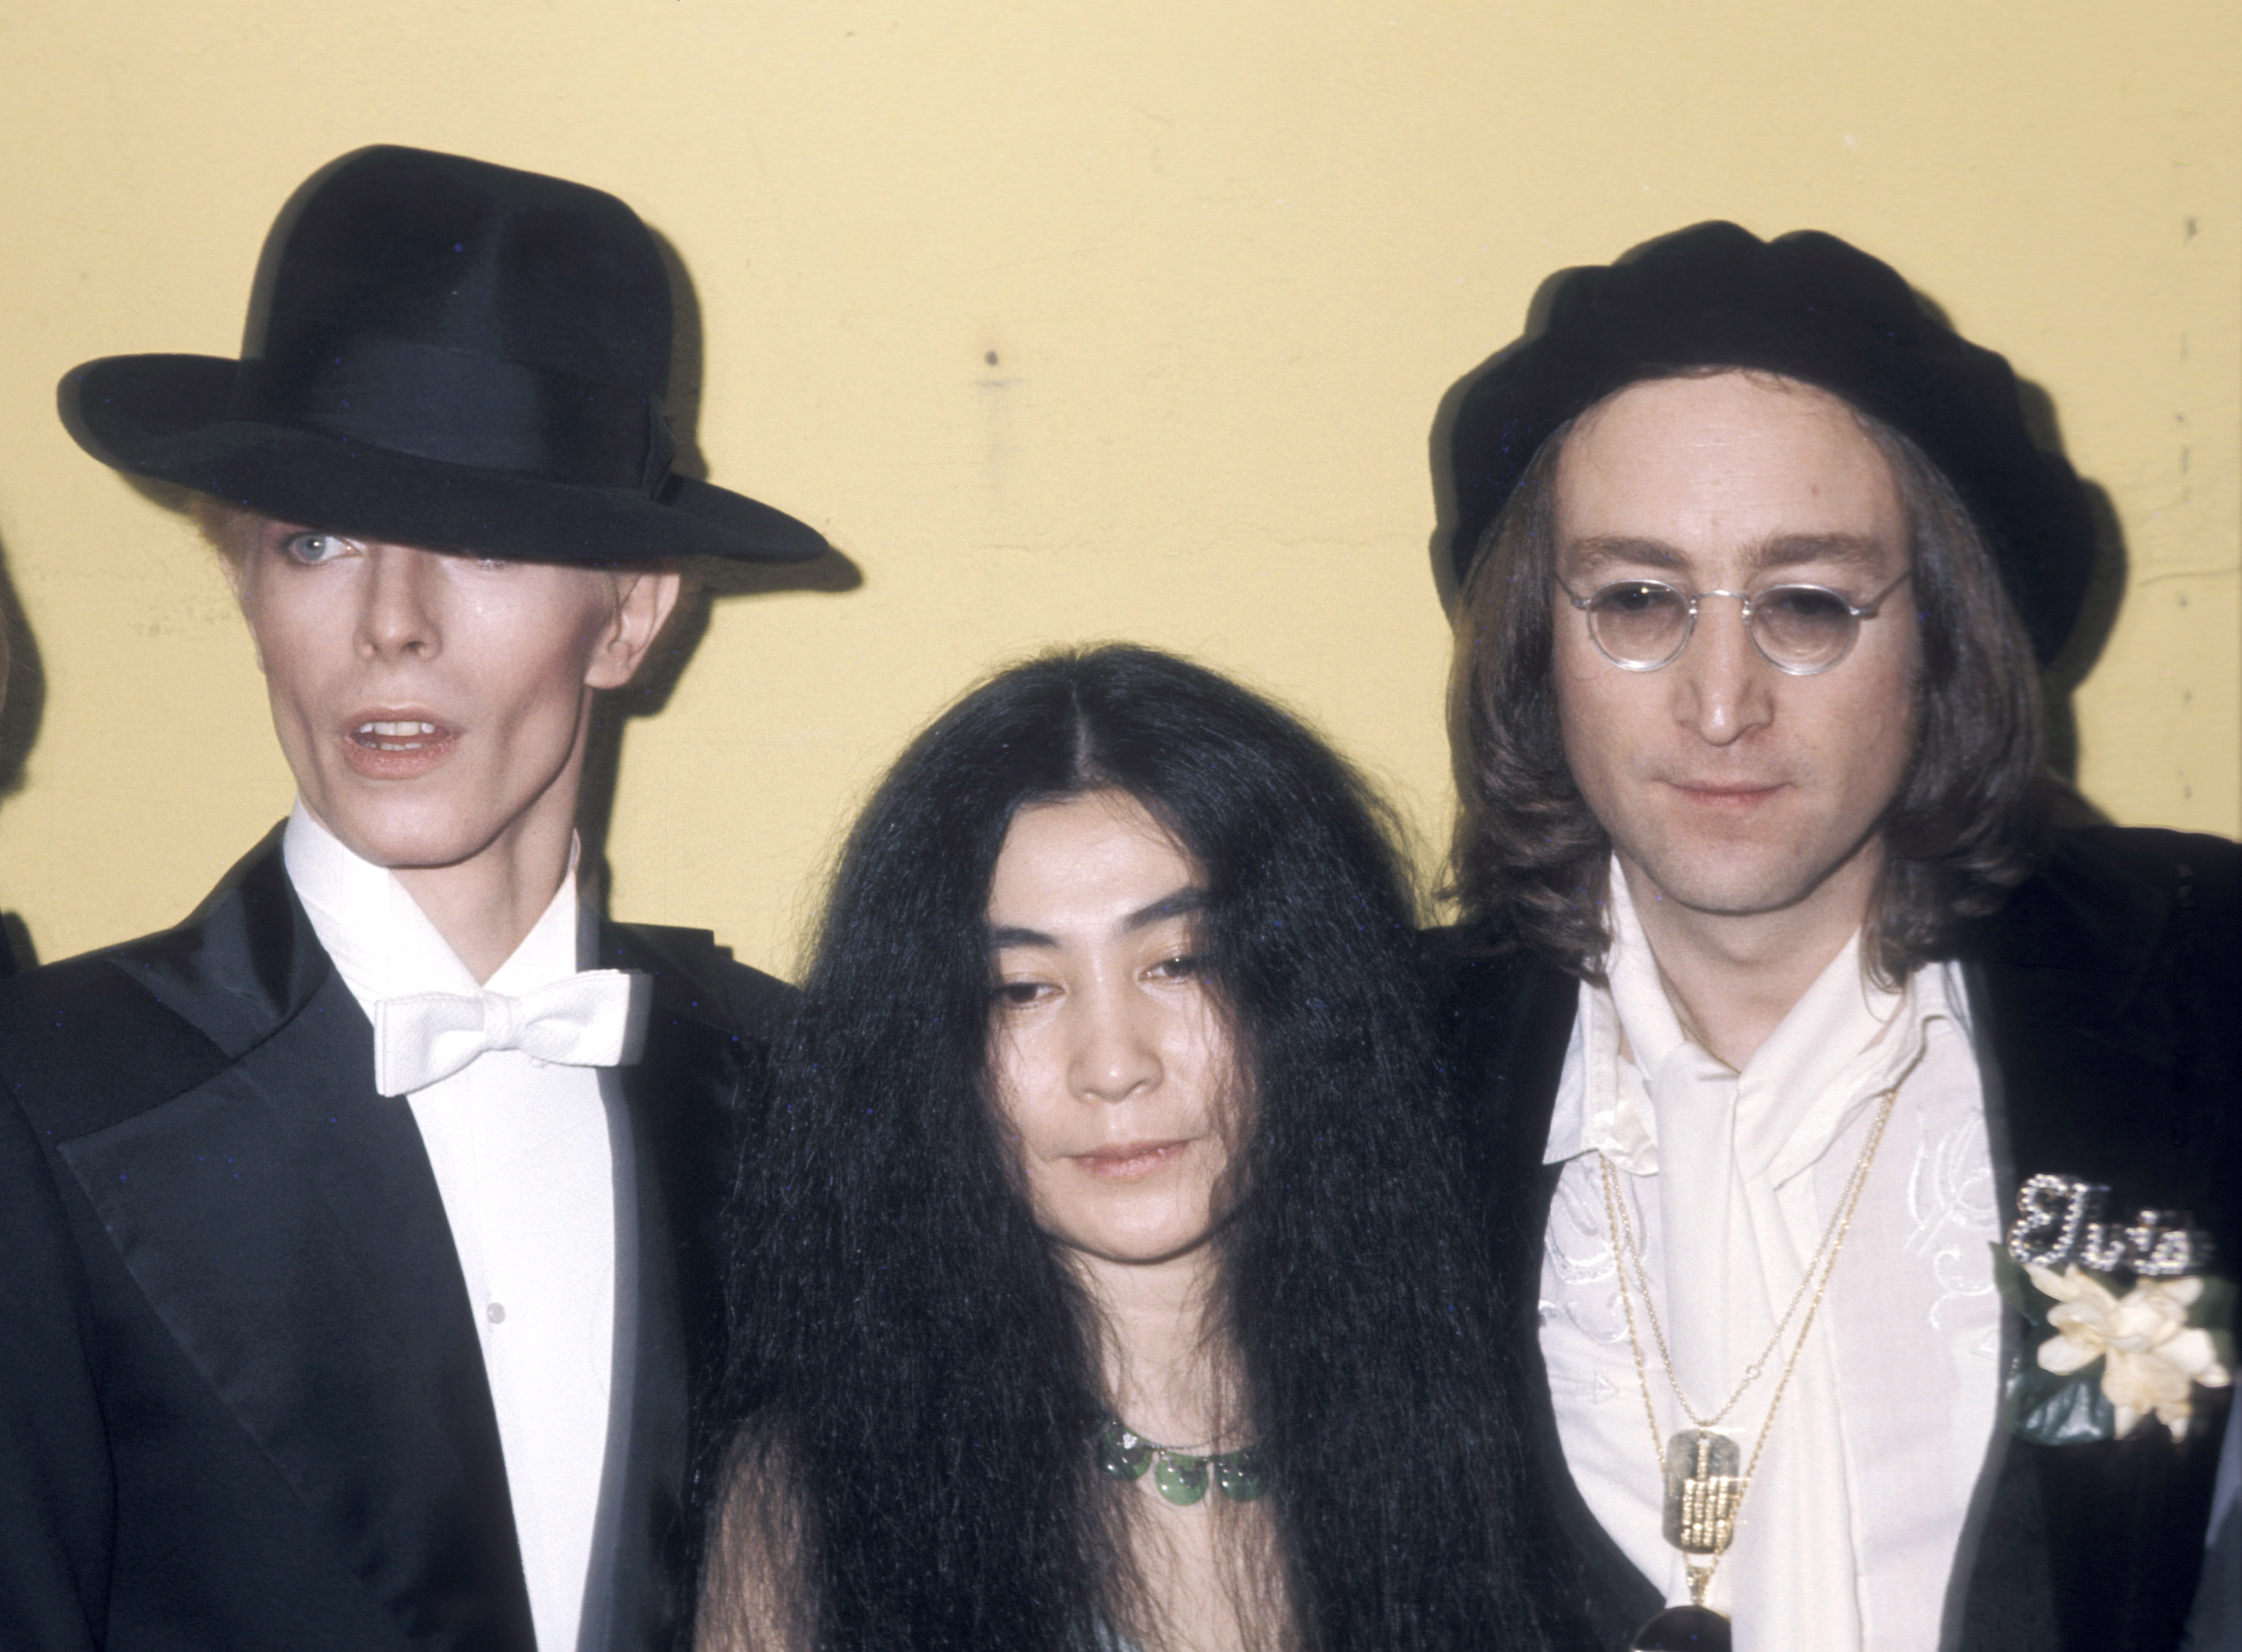 David Bowie, Yoko Ono, and John Lennon in front of a wall